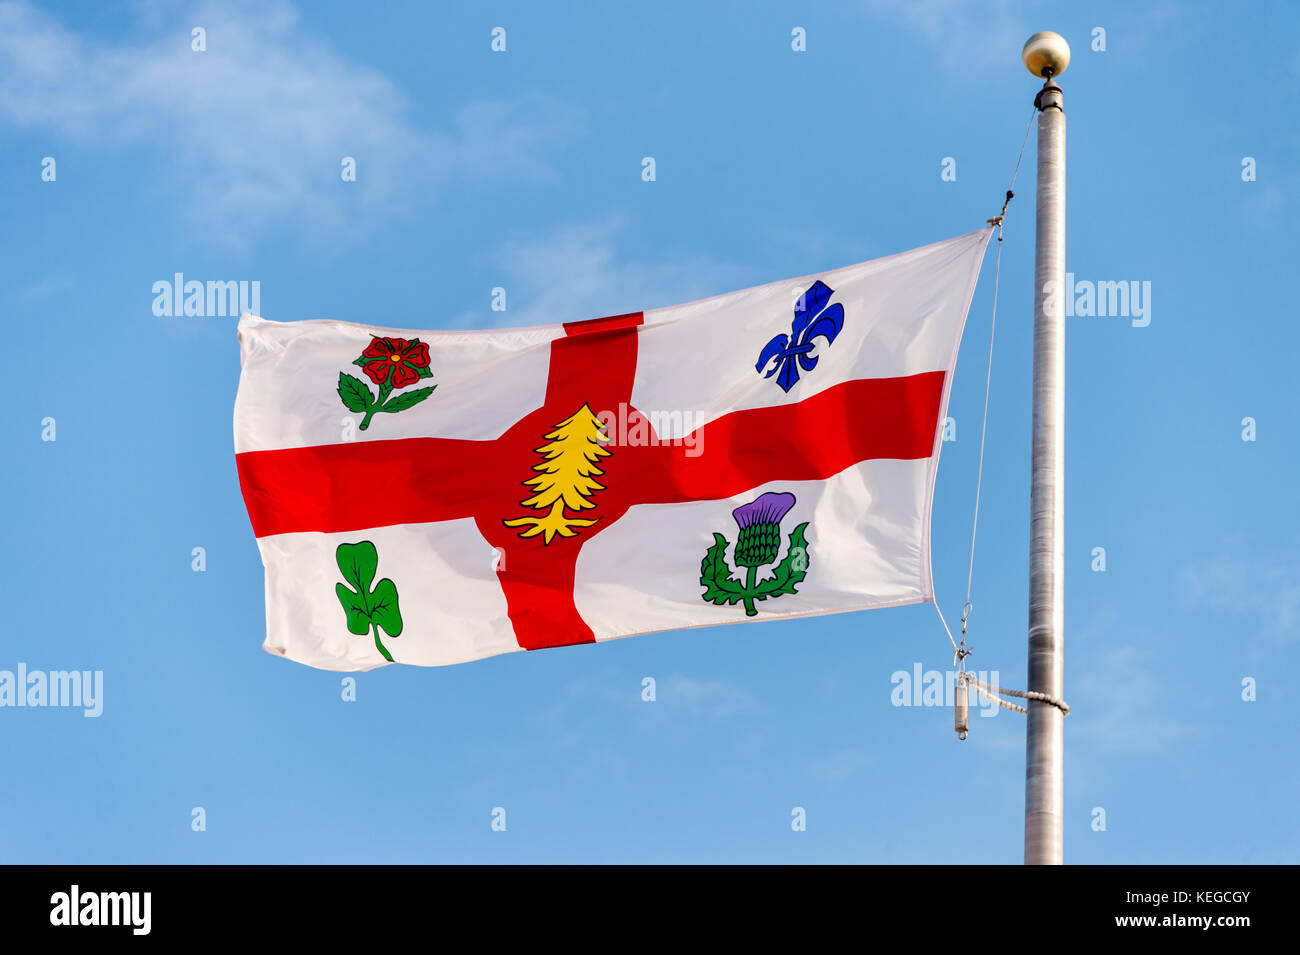 New montreal flag now includes a new symbol (white pine) to represent First Nations on the flag (2017) Stock Photo